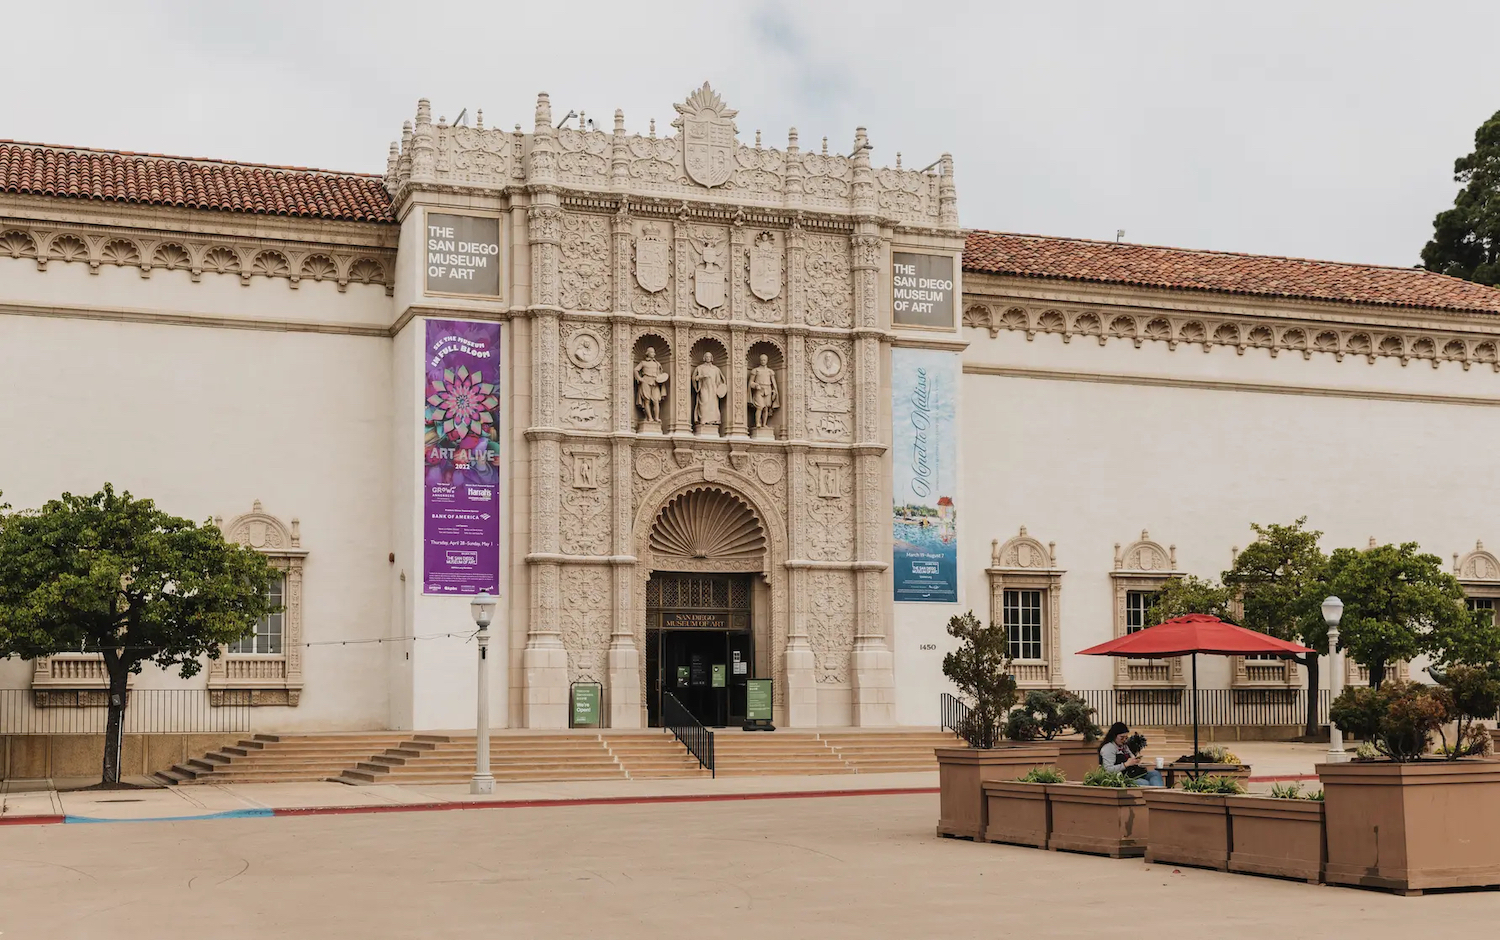 Exterior of the San Diego Museum of Art in Balboa Park, San Diego